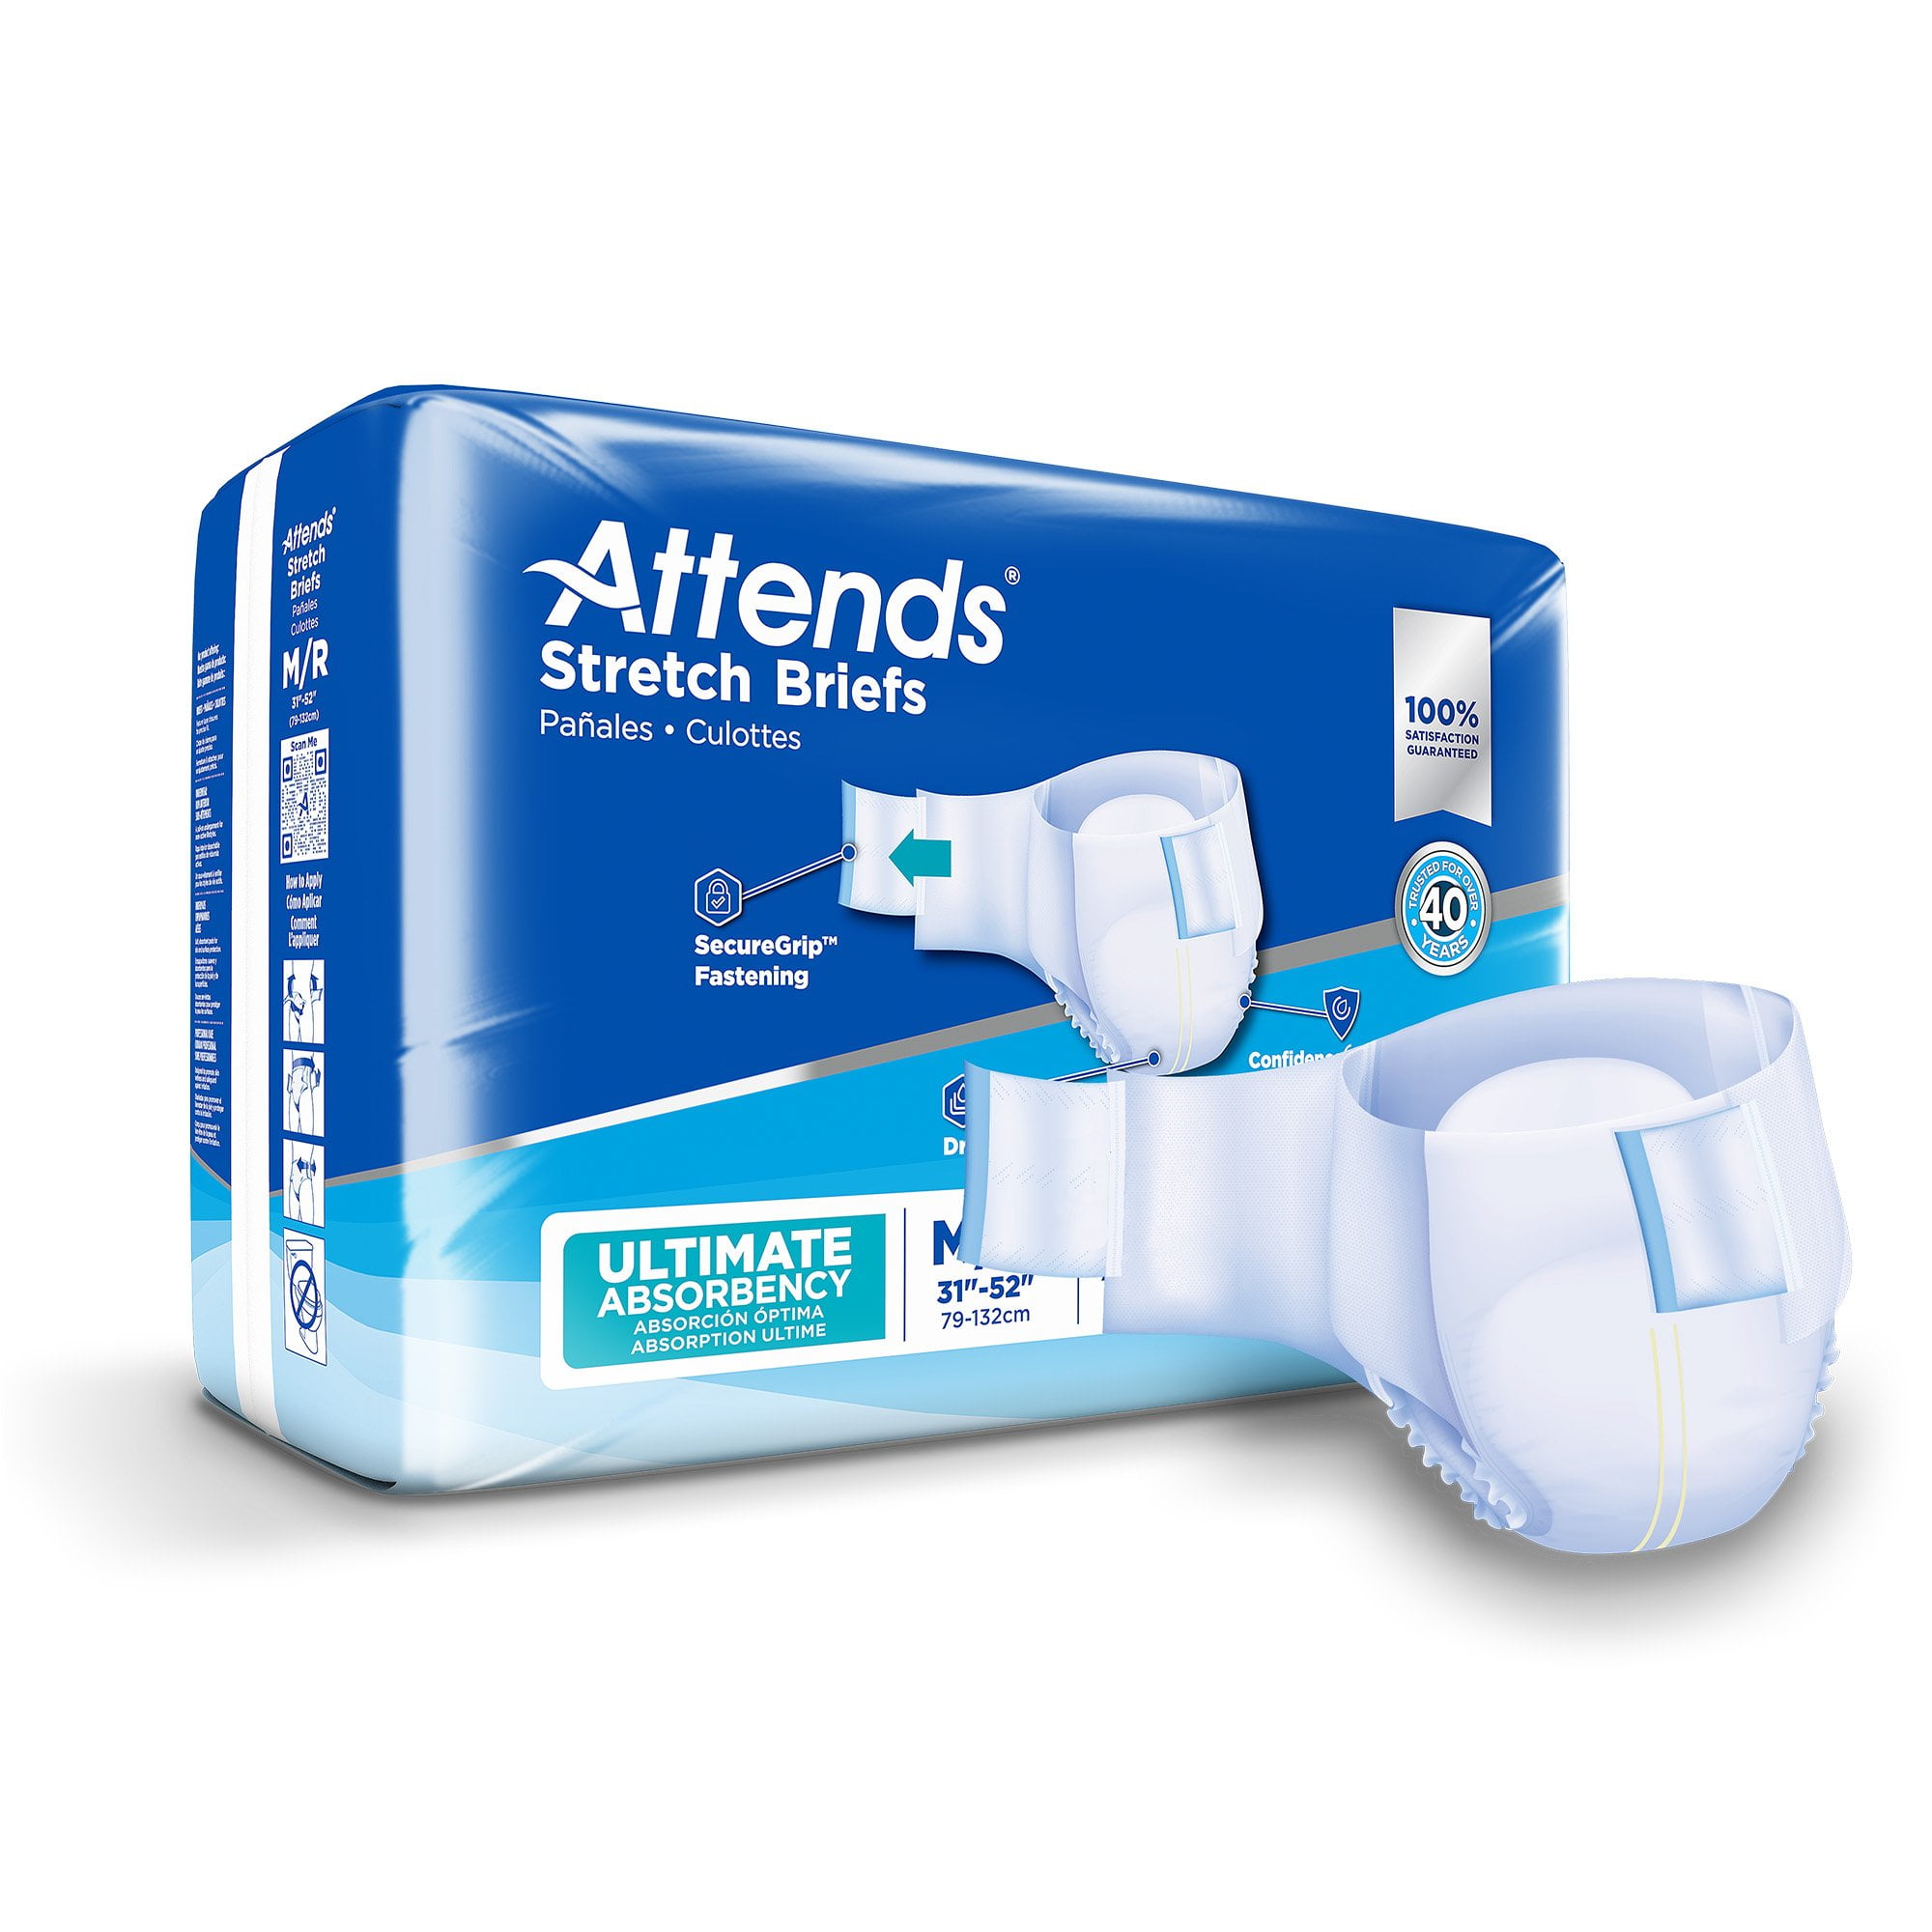 Attends Premier Adult Incontinence Brief M Heavy Absorbency Overnight, ALI-BR20,  Overnight, 14 Ct 